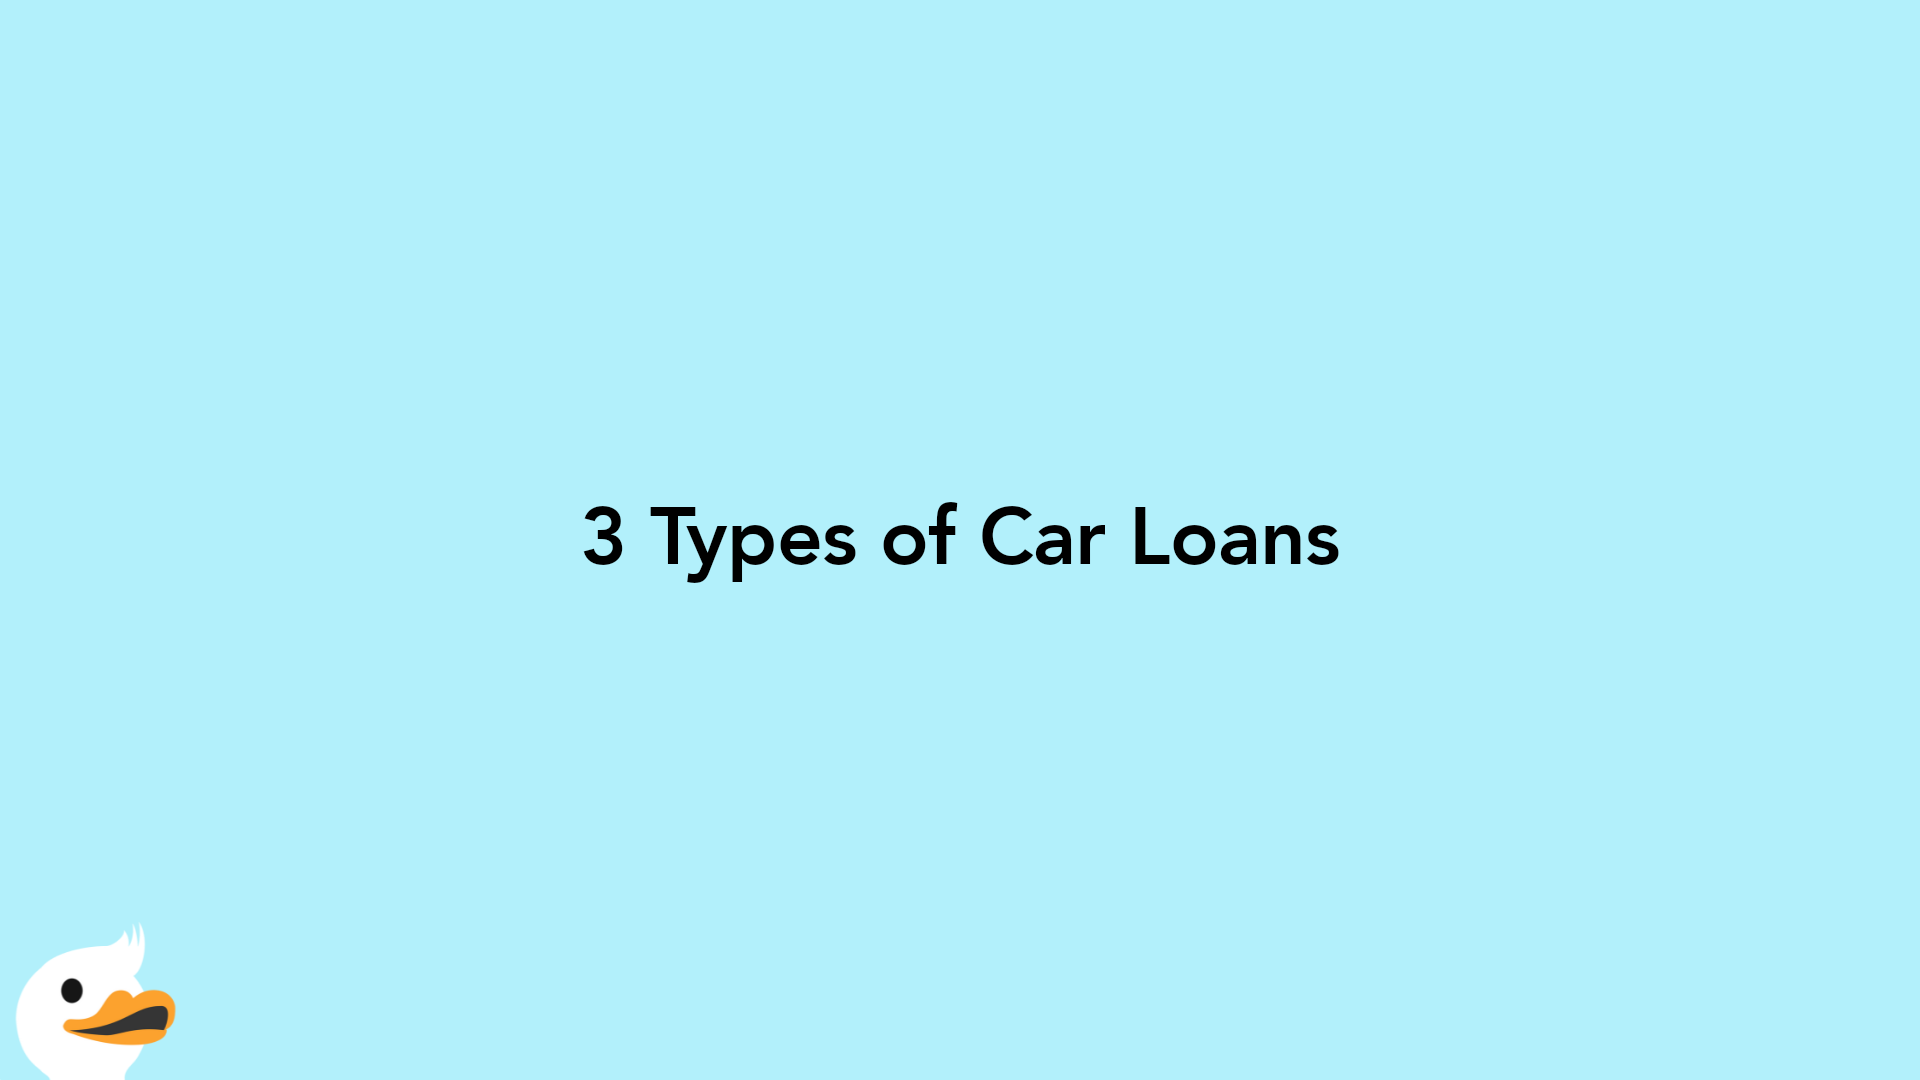 3 Types of Car Loans